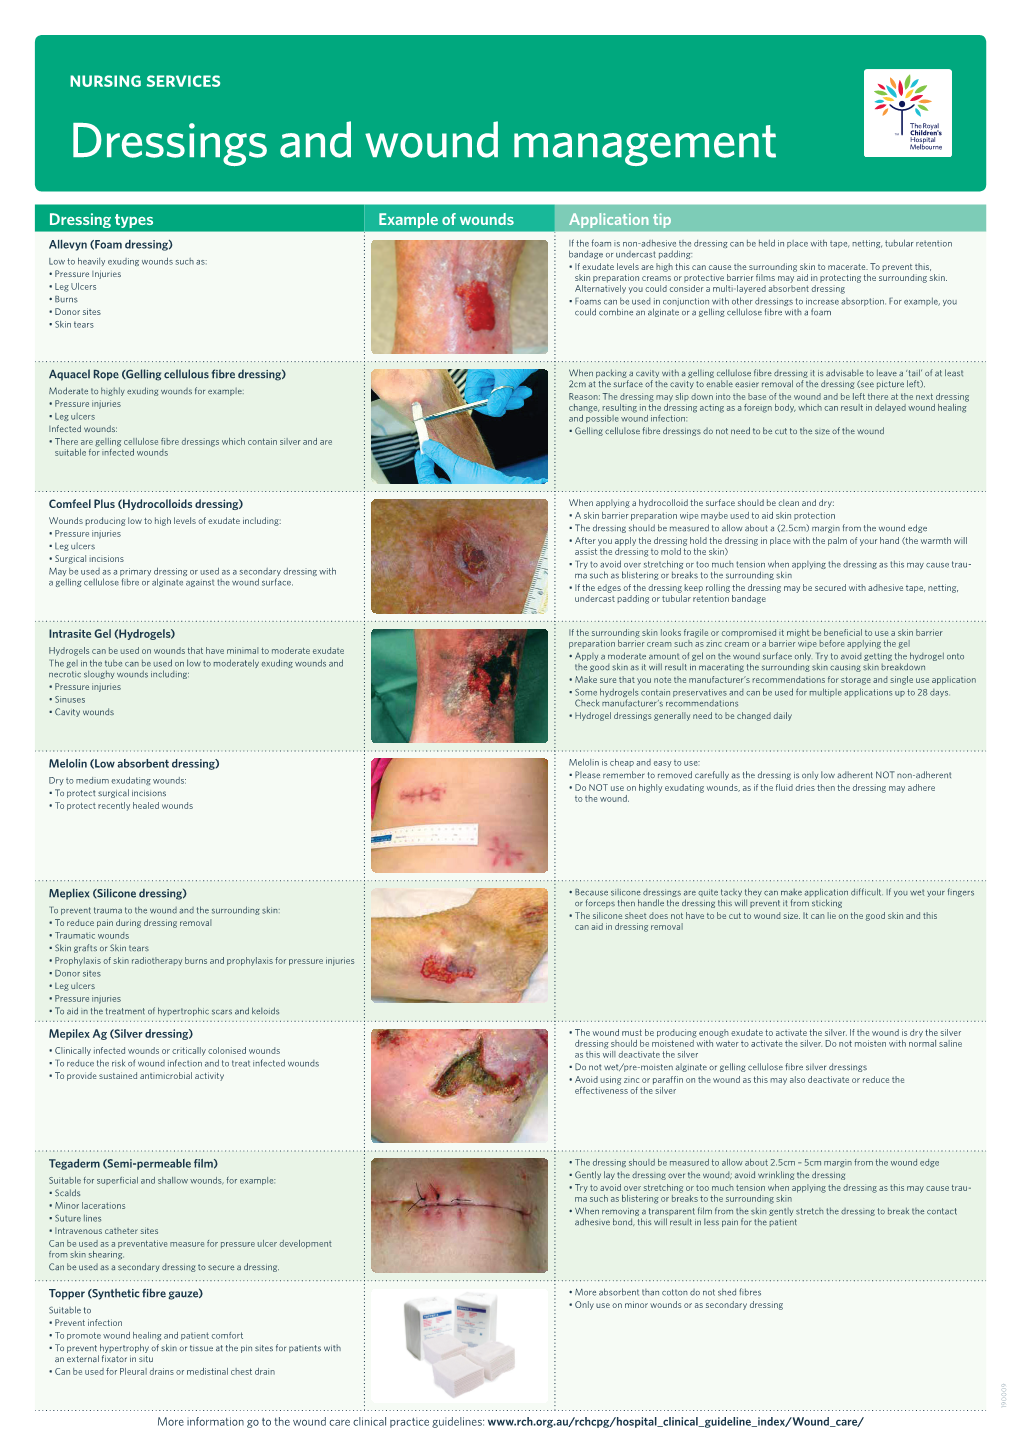 Dressings and Wound Management